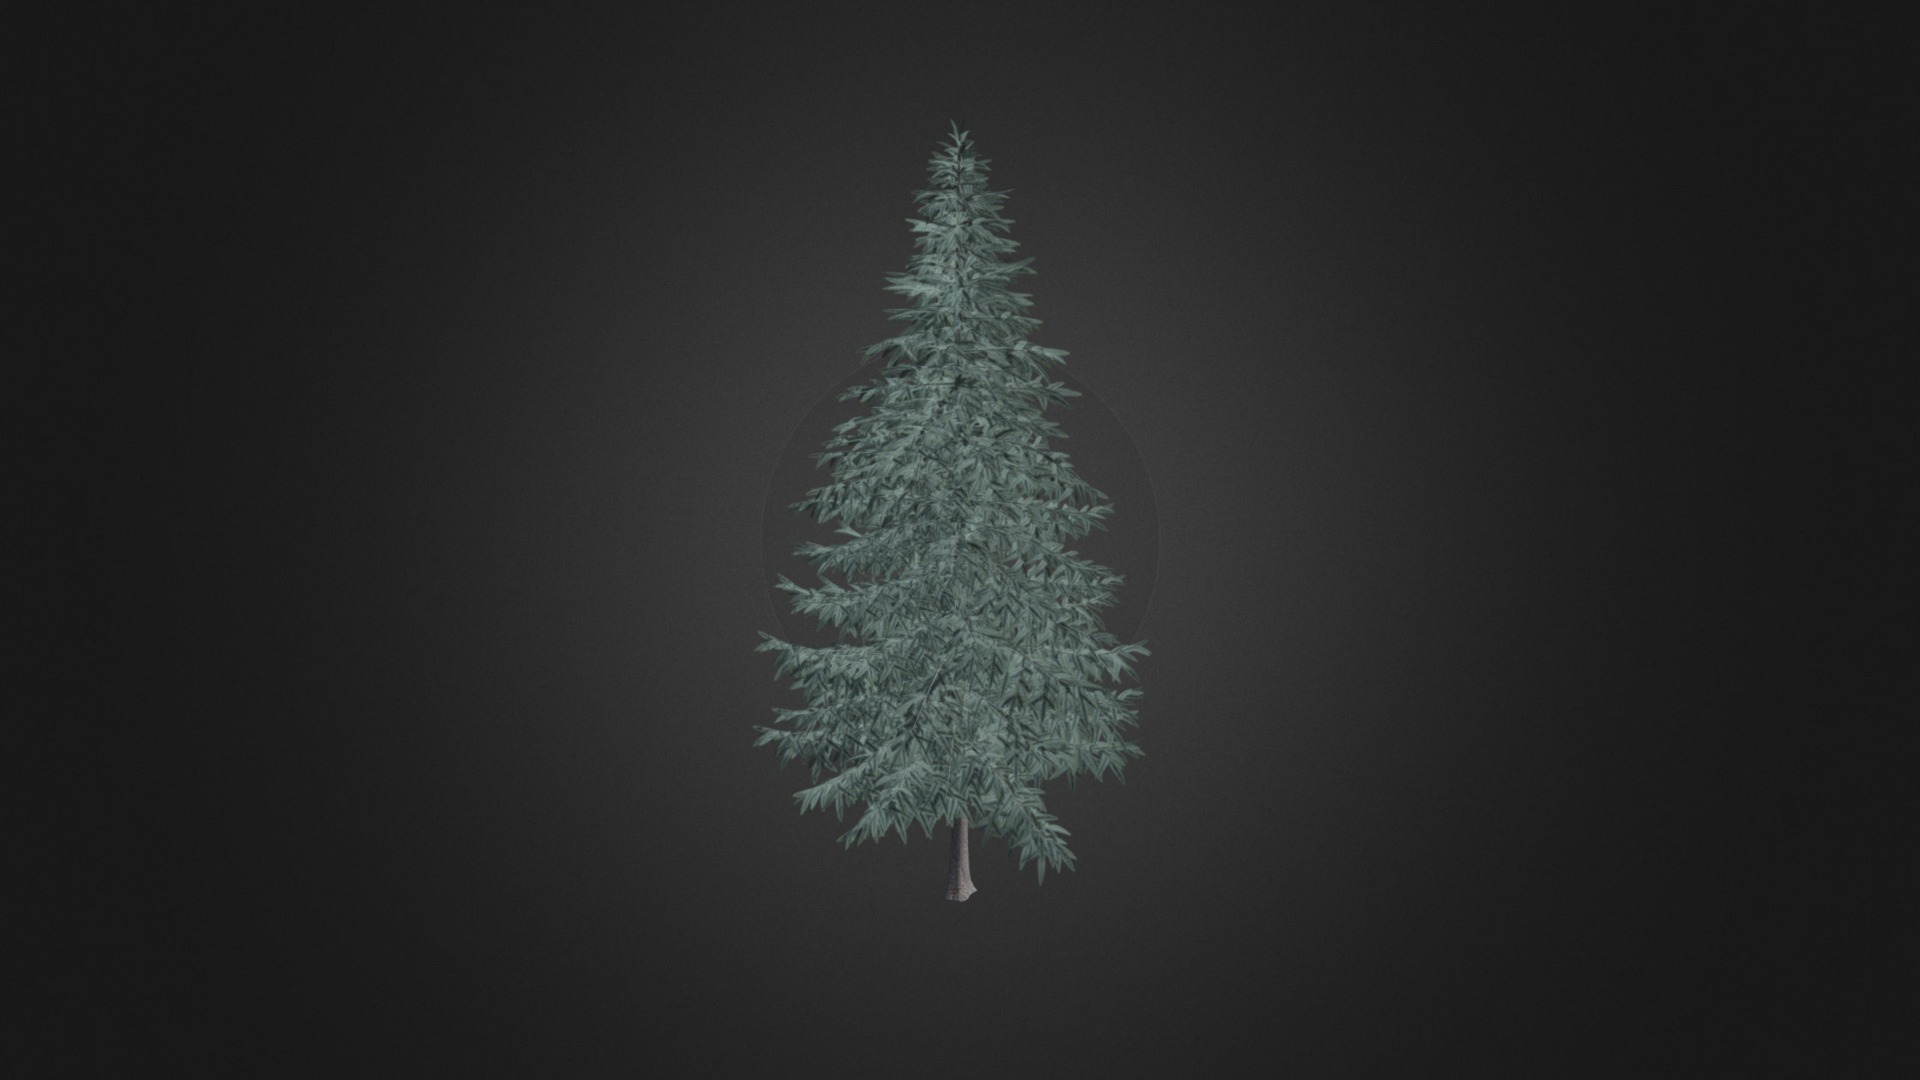 3D model Spruce Tree 3D Model 7.8m - This is a 3D model of the Spruce Tree 3D Model 7.8m. The 3D model is about a tree with a white background.